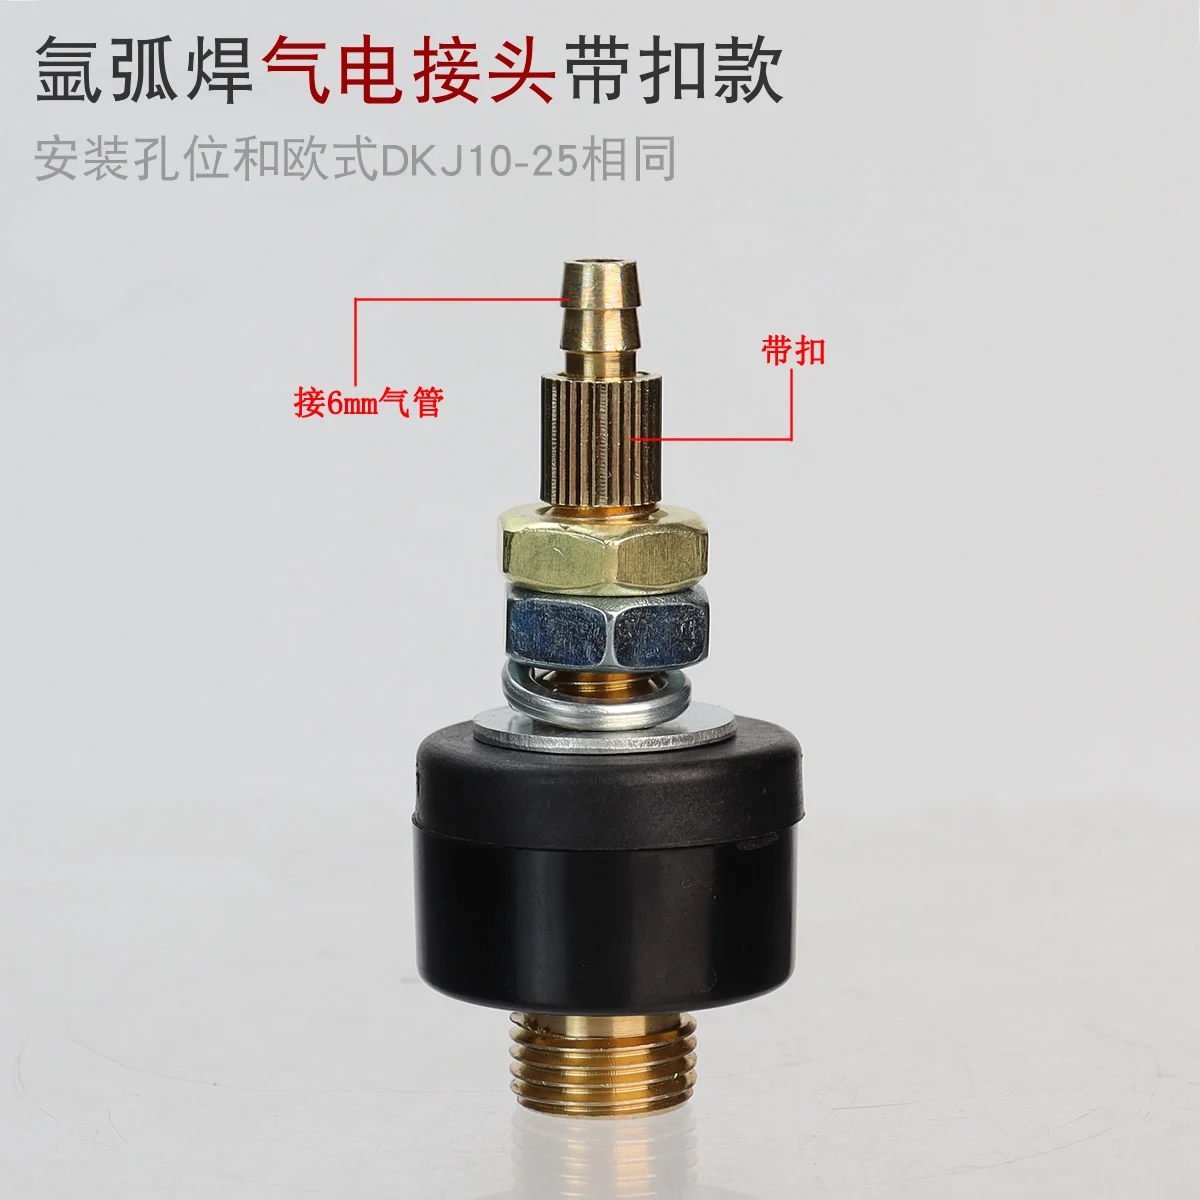 

Gas-electric Connector DKJ10-25 TIG Welding Machine Joint